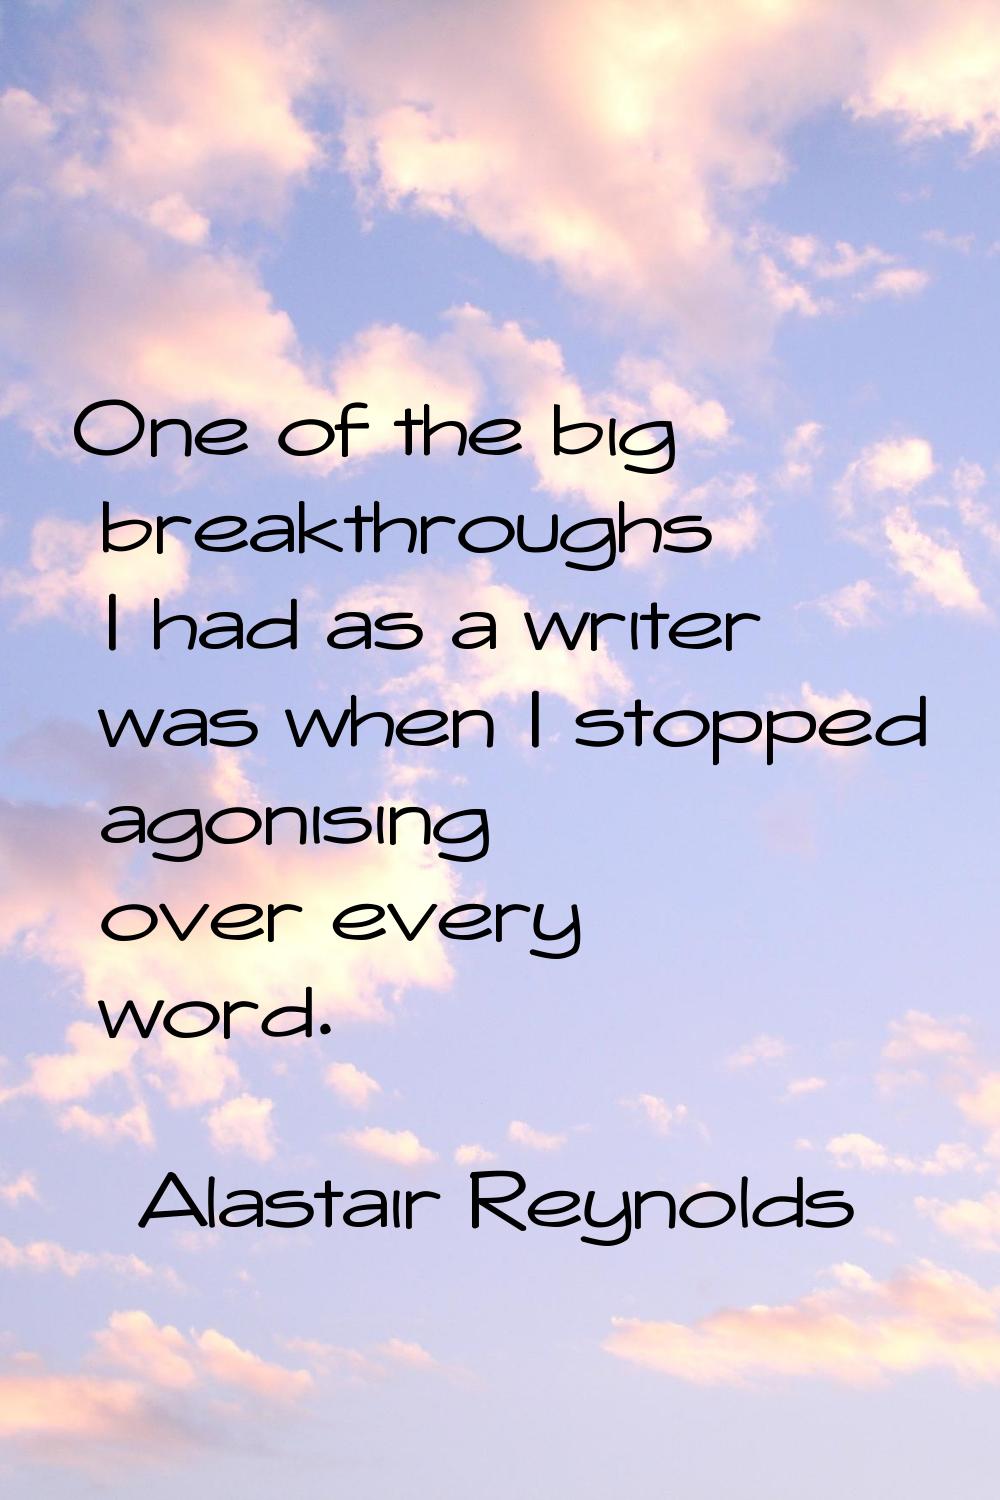 One of the big breakthroughs I had as a writer was when I stopped agonising over every word.